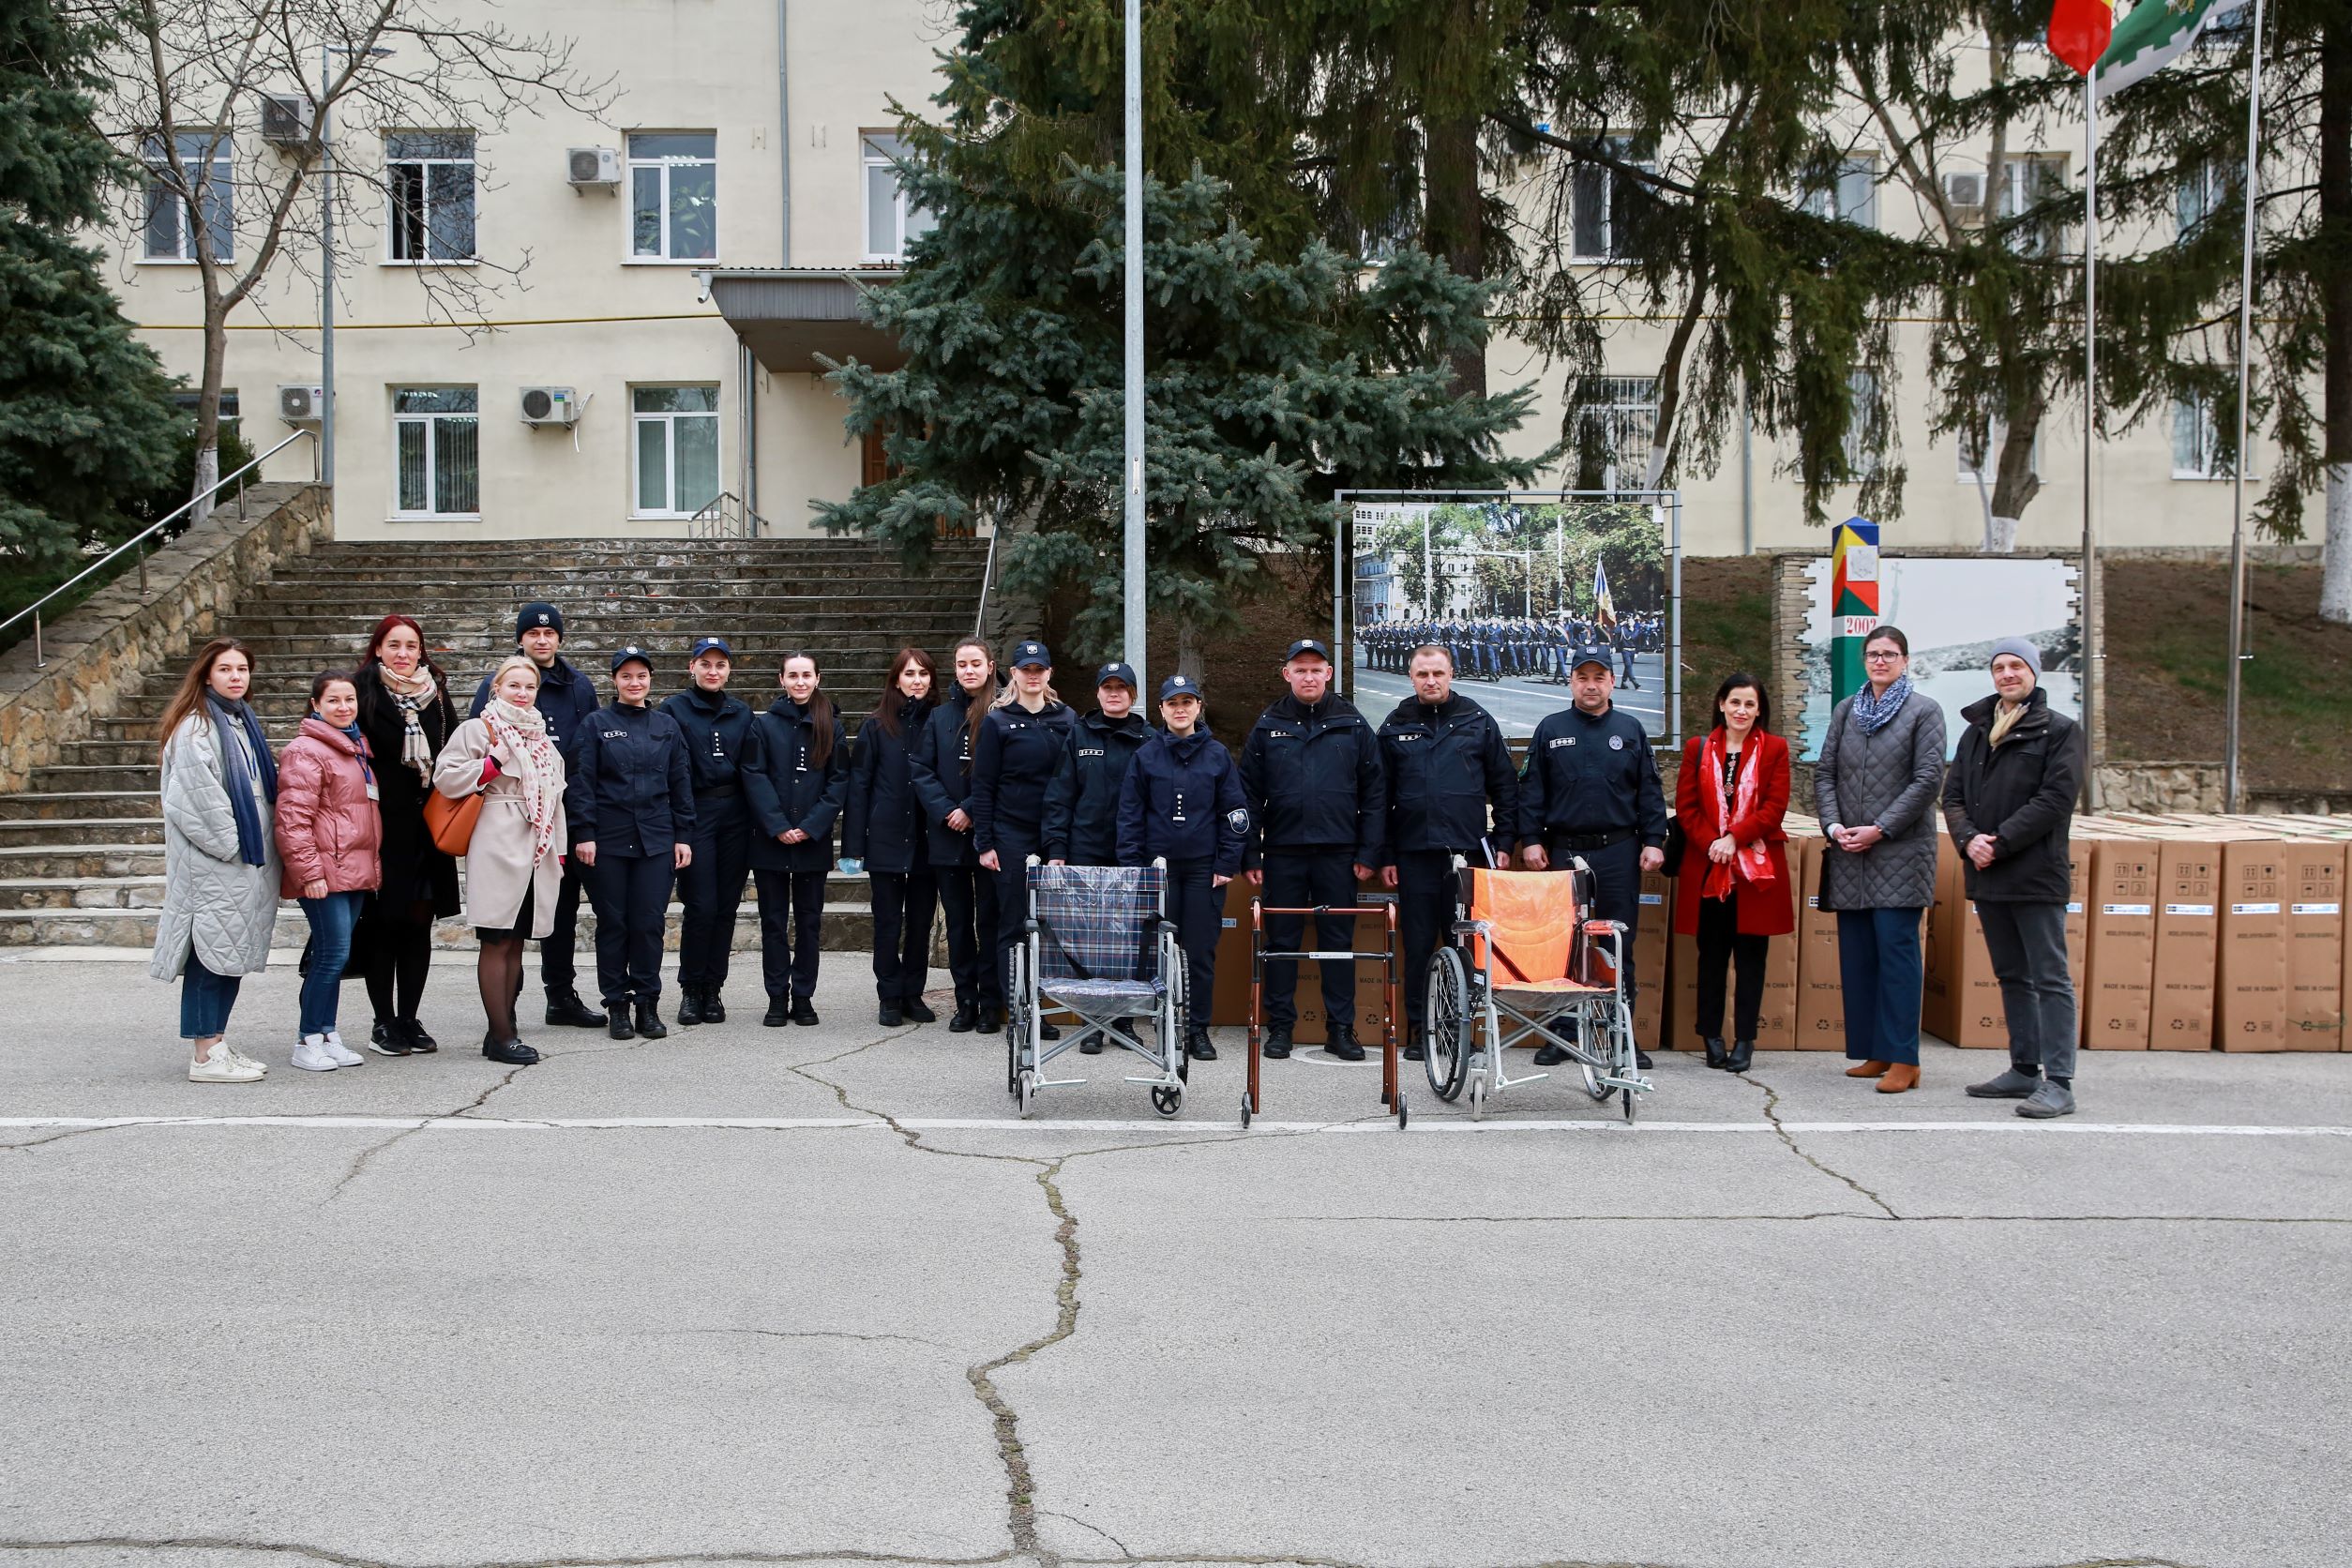 Wheelchairs donation to Border Police